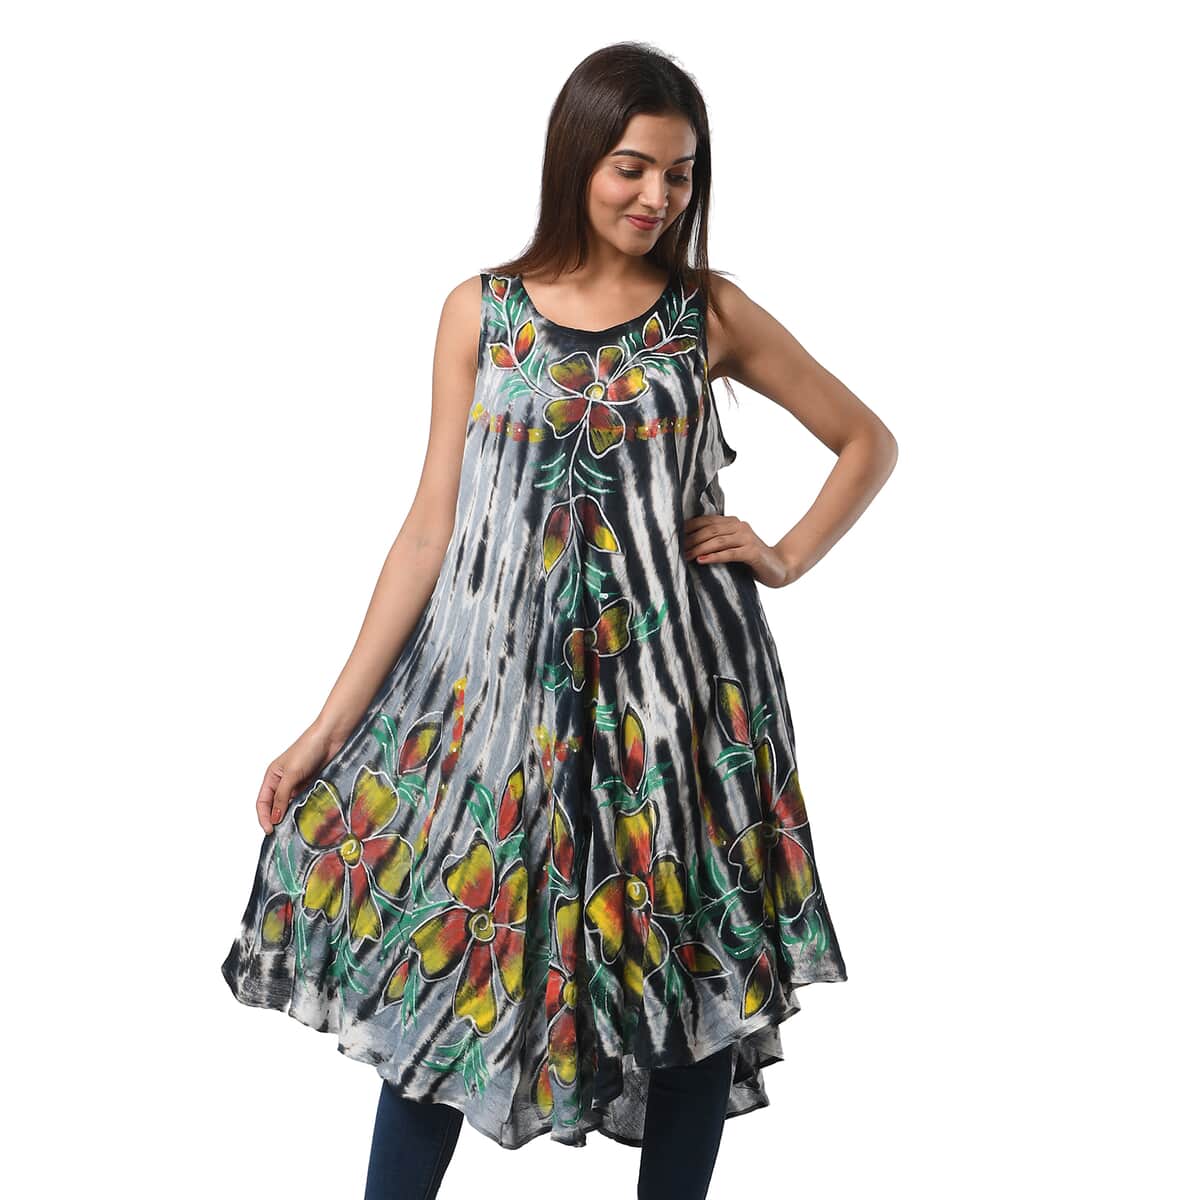 JOVIE Black Stripe Tie Dye with Floral Umbrella Dress - One Size Fits Most image number 1